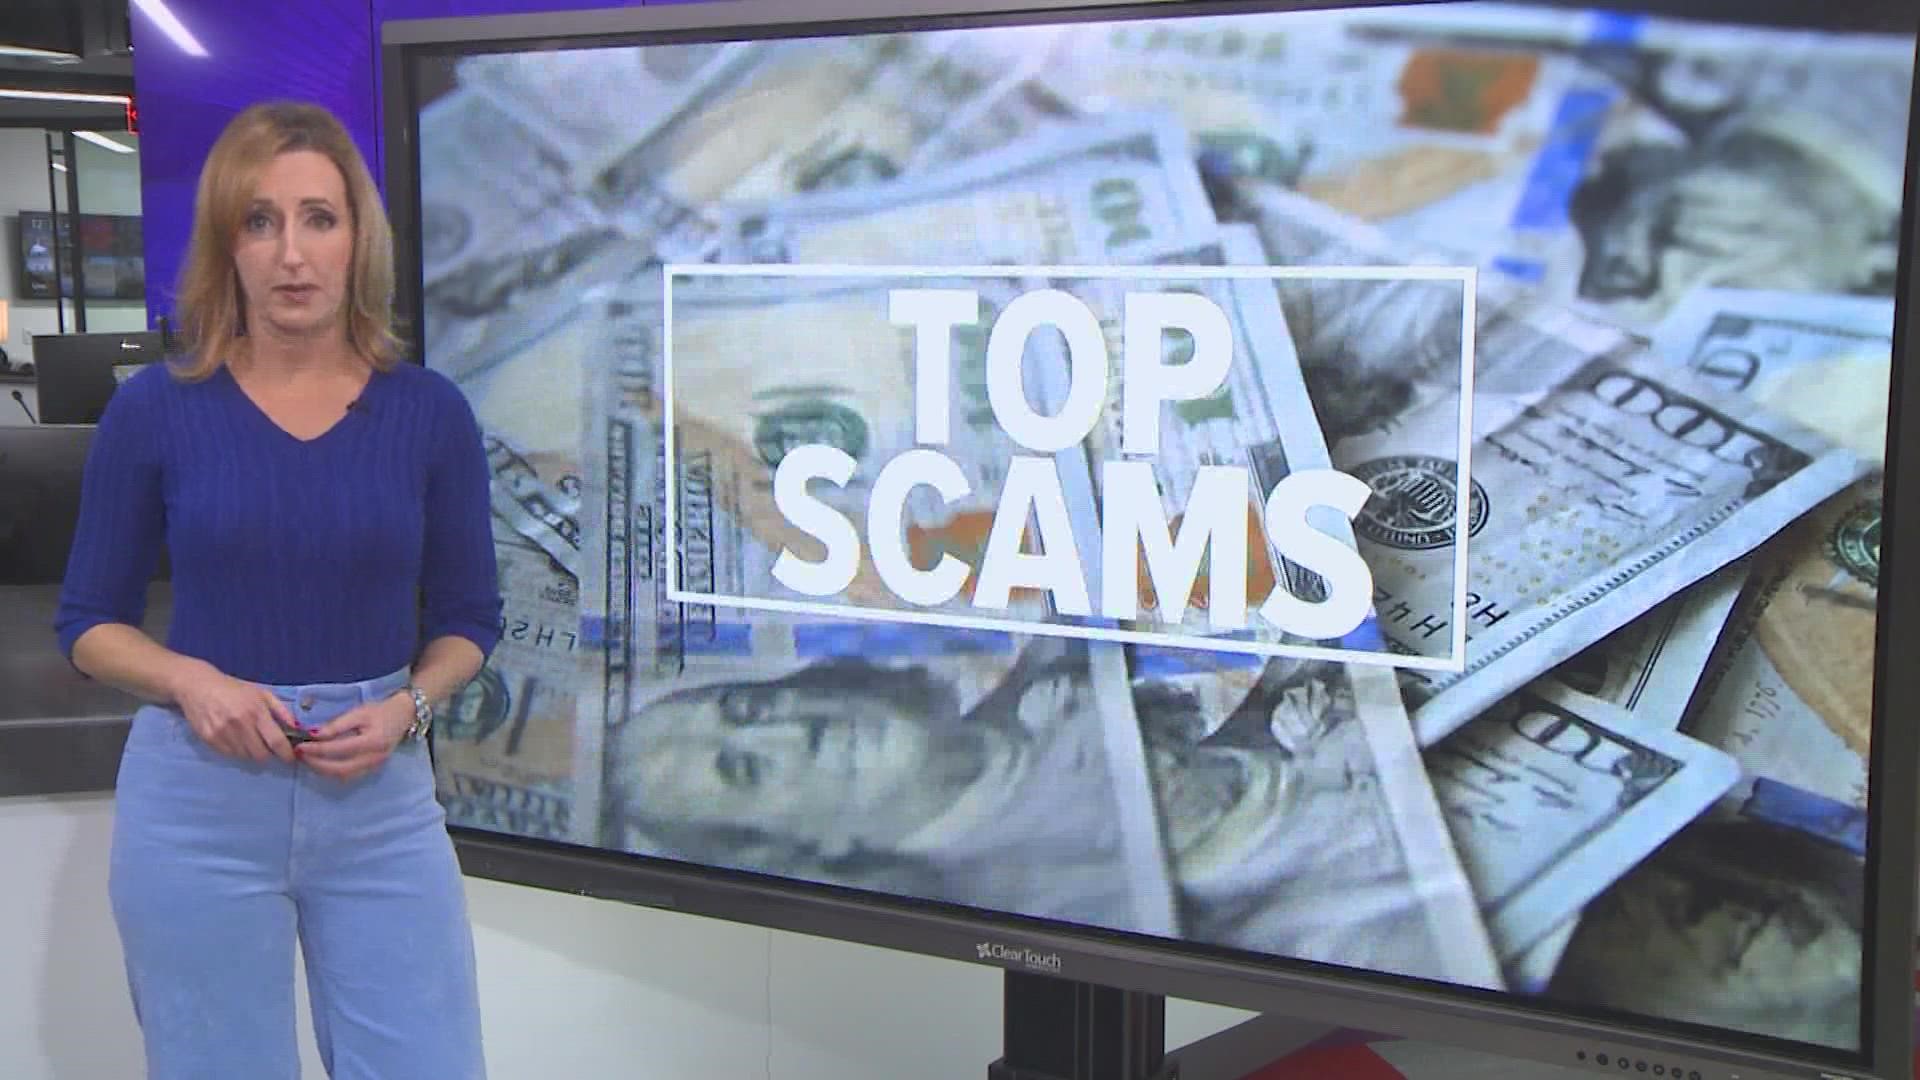 Here are some popular scams you should be on the lookout for in the new year.